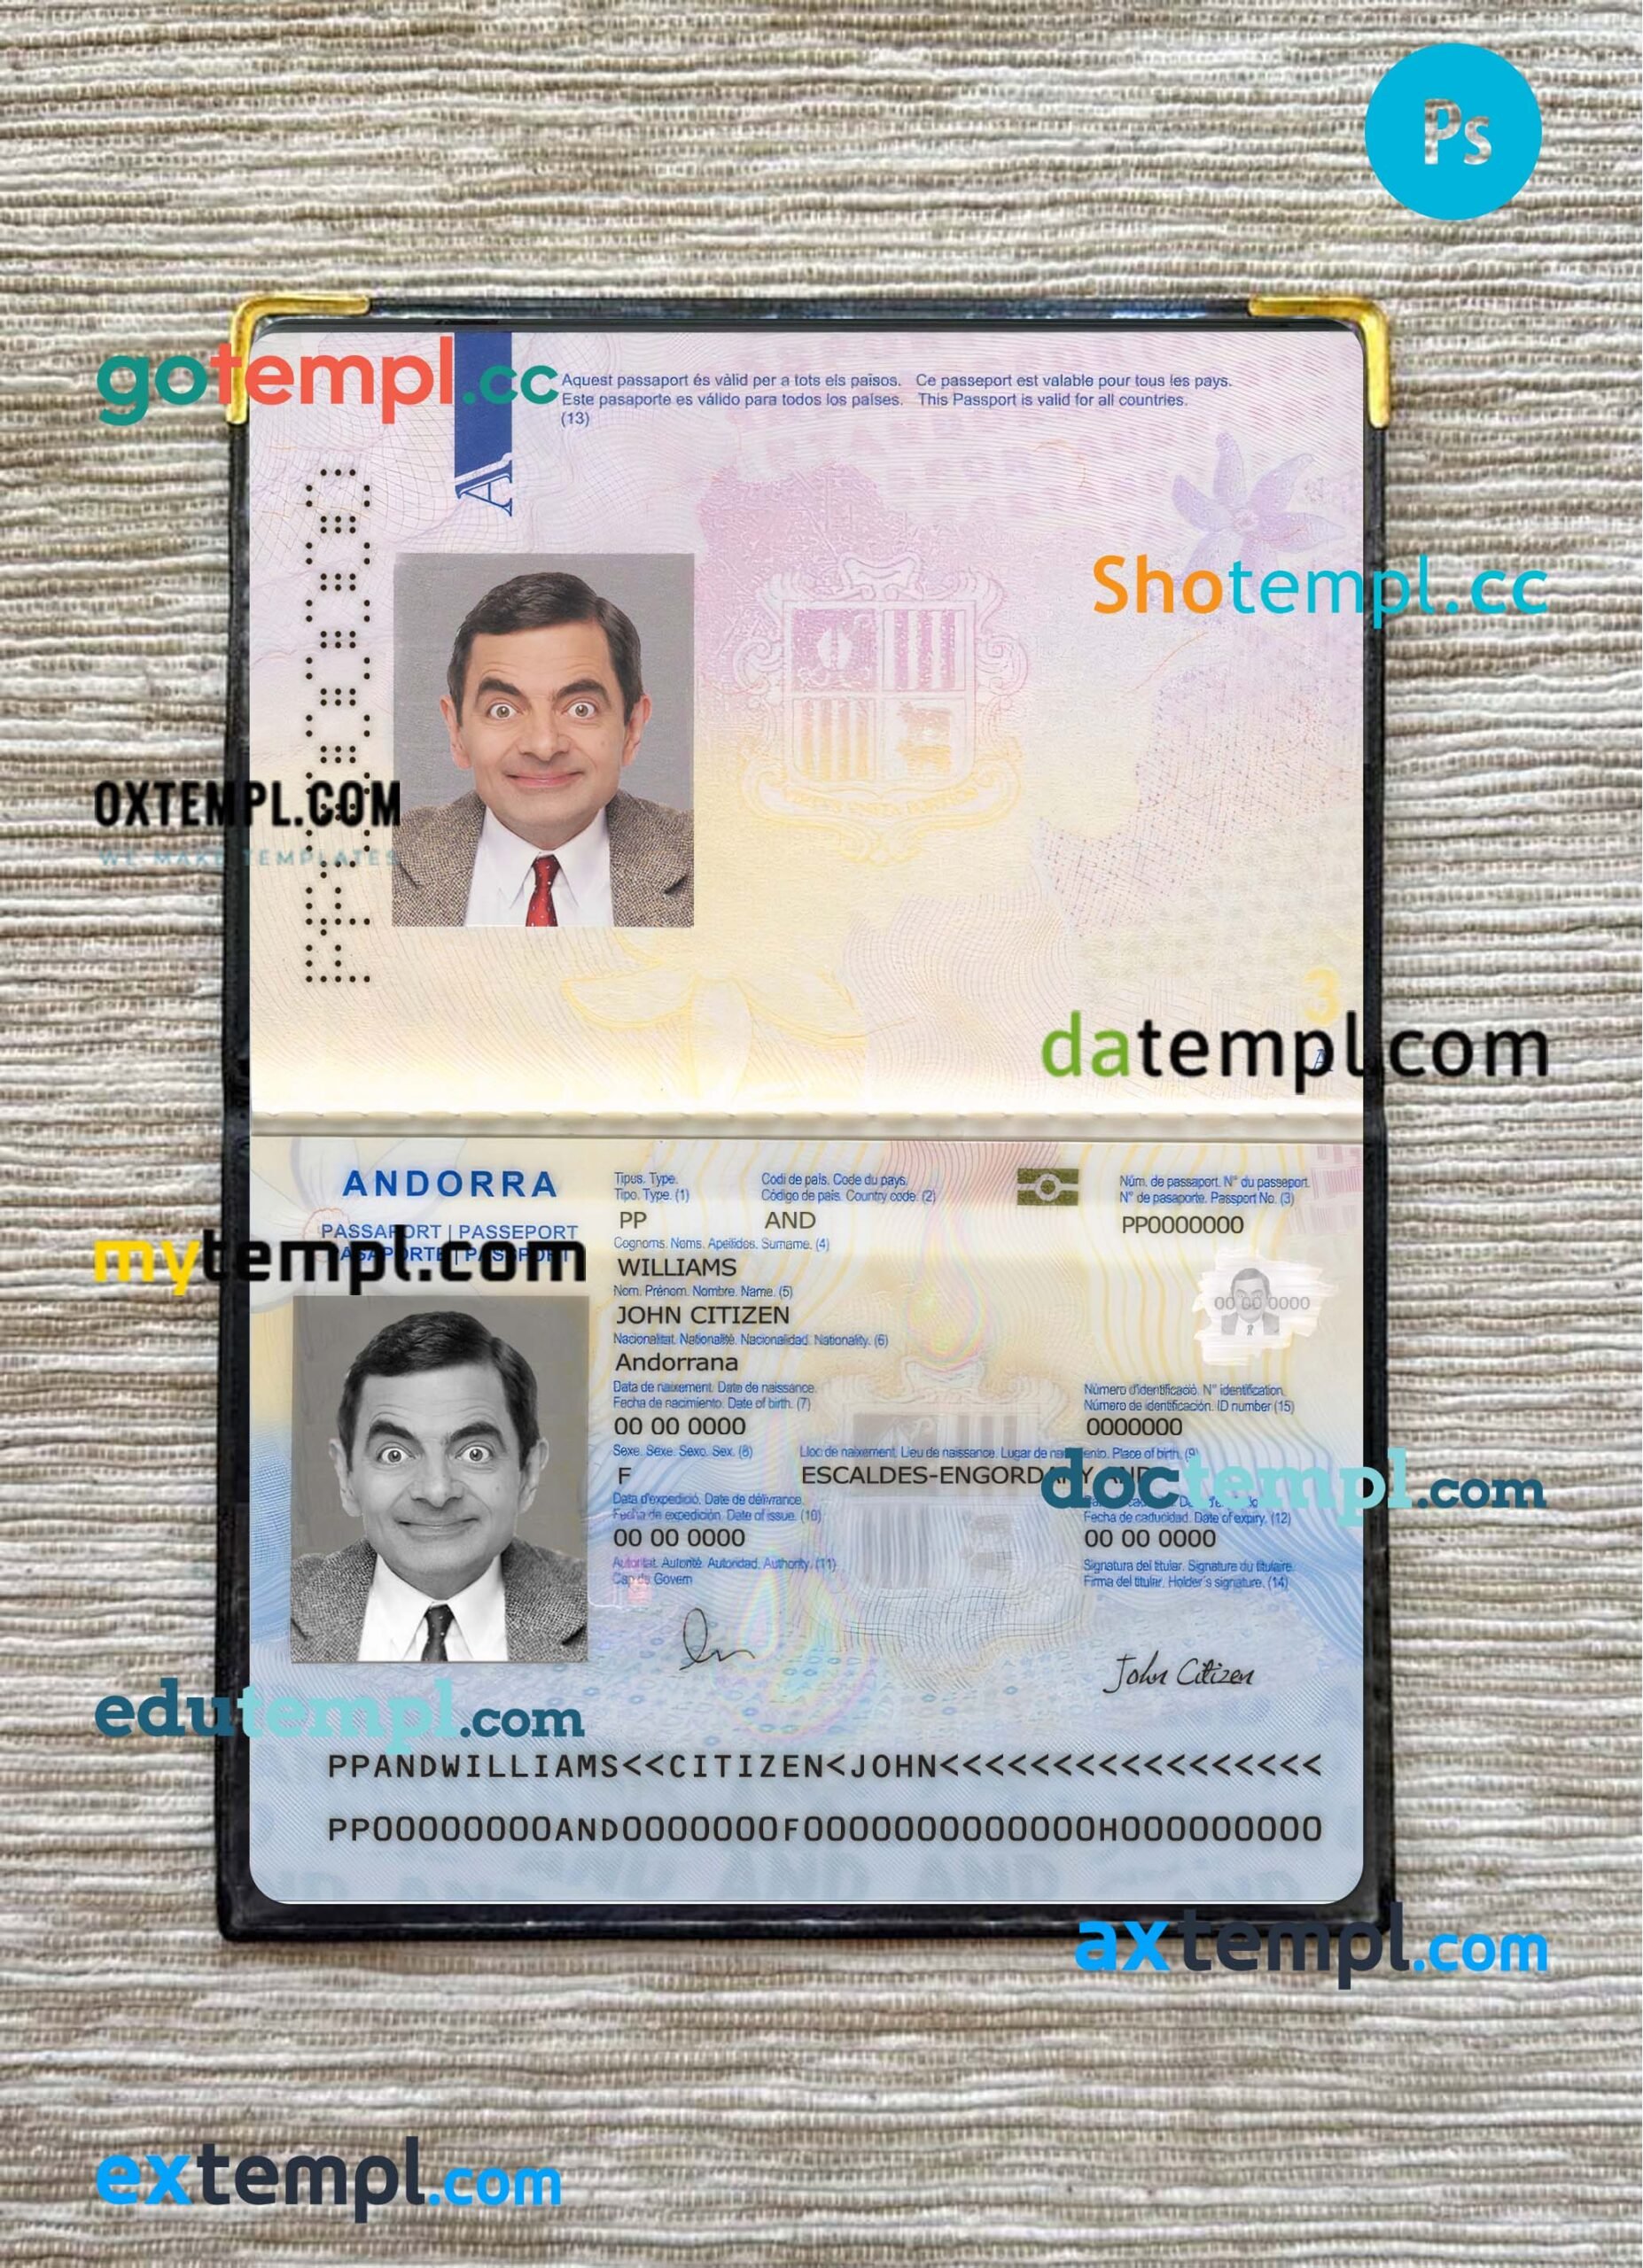 Netherlands (Holland) passport PSD files, editable scan and photo-realistic look sample (2006-2016), 2 in 1